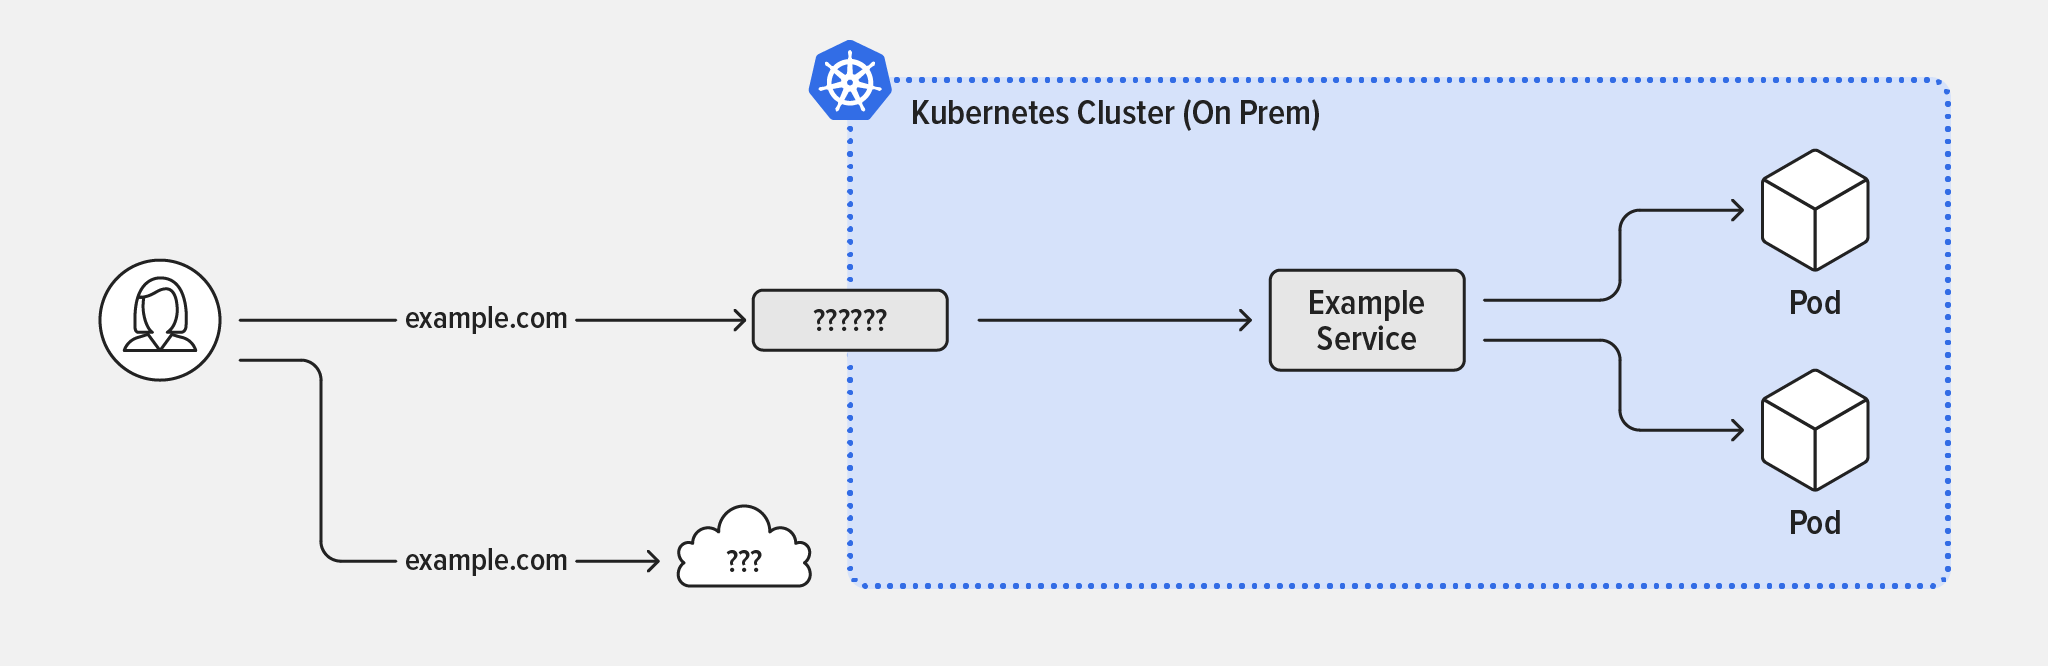 Diagram of Kubernetes clusters hosted on premises, with nodes and standard Layer 2 switches and Layer 3 routers providing the networking for communication in the data center.